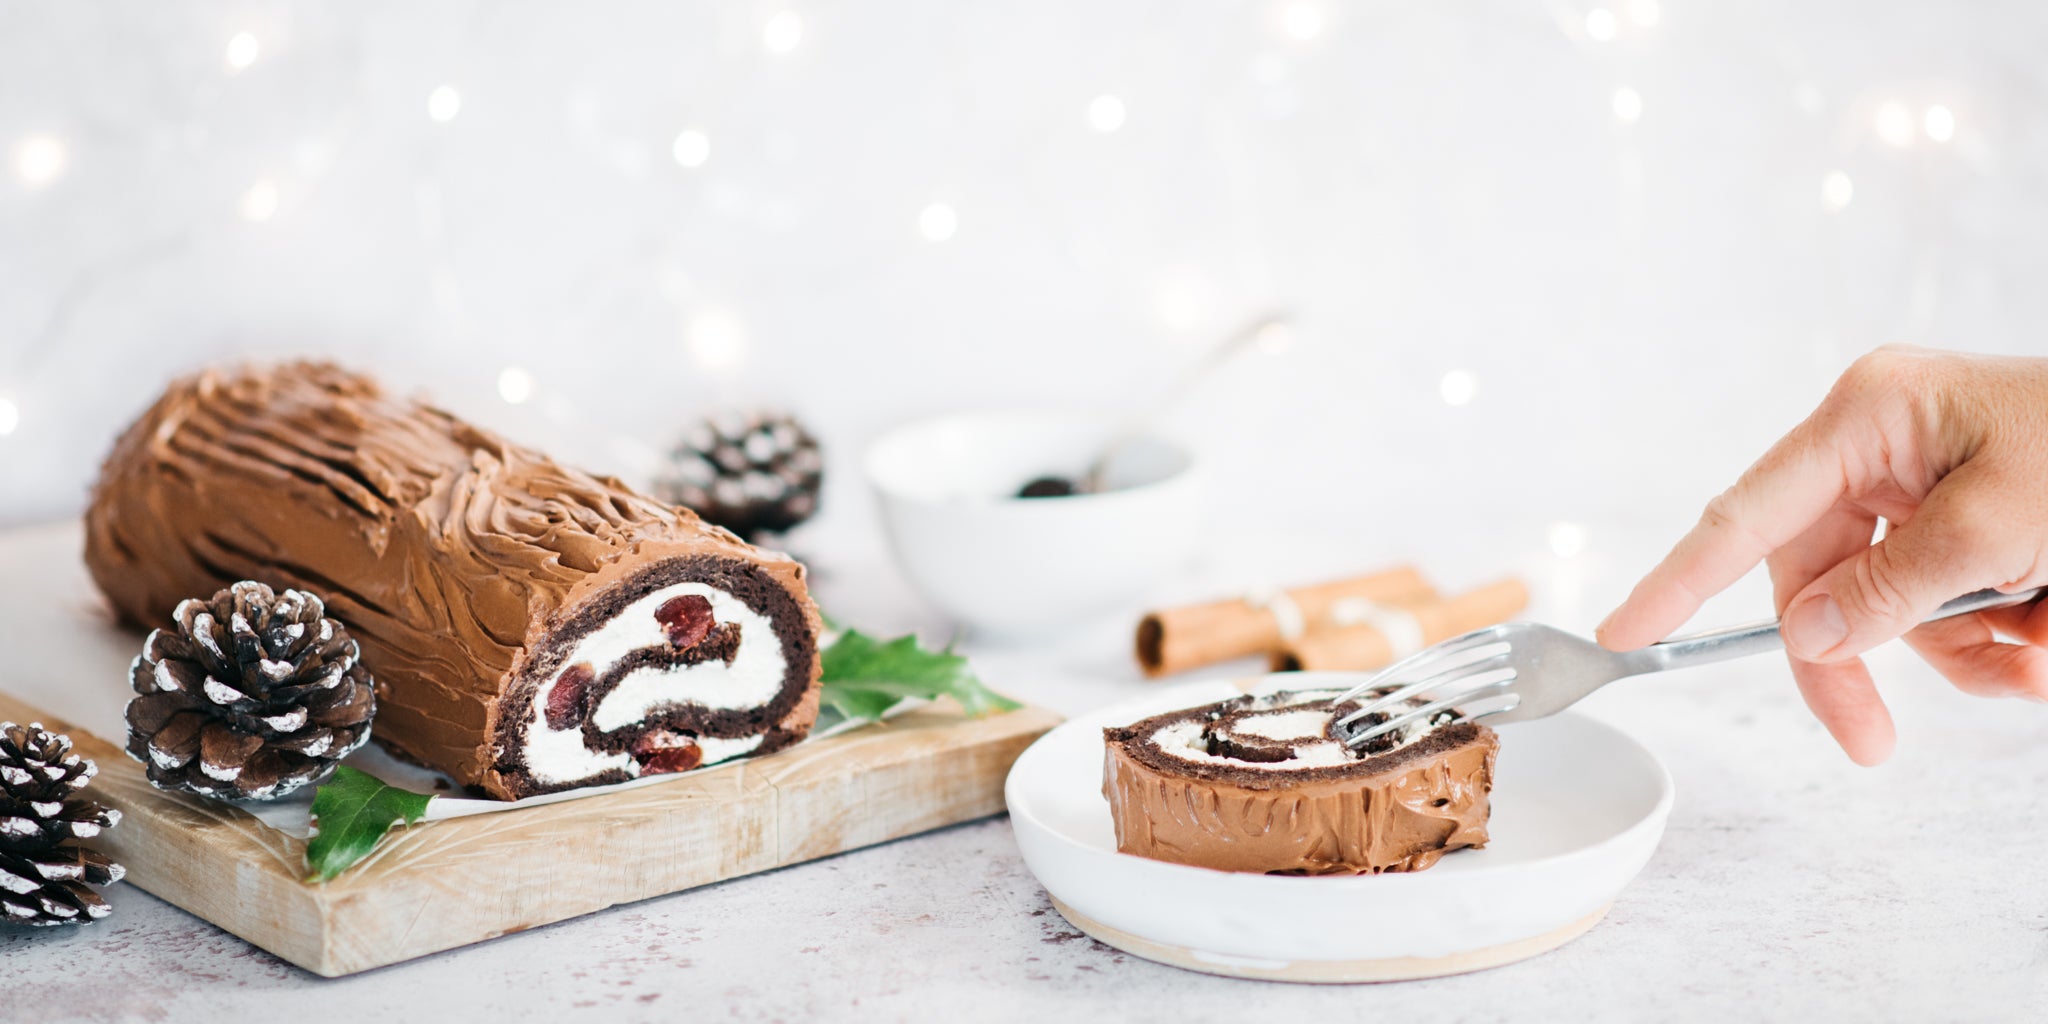 Black Forest Yule log on a wooden board with a slice on a plate in front and fork cutting into it